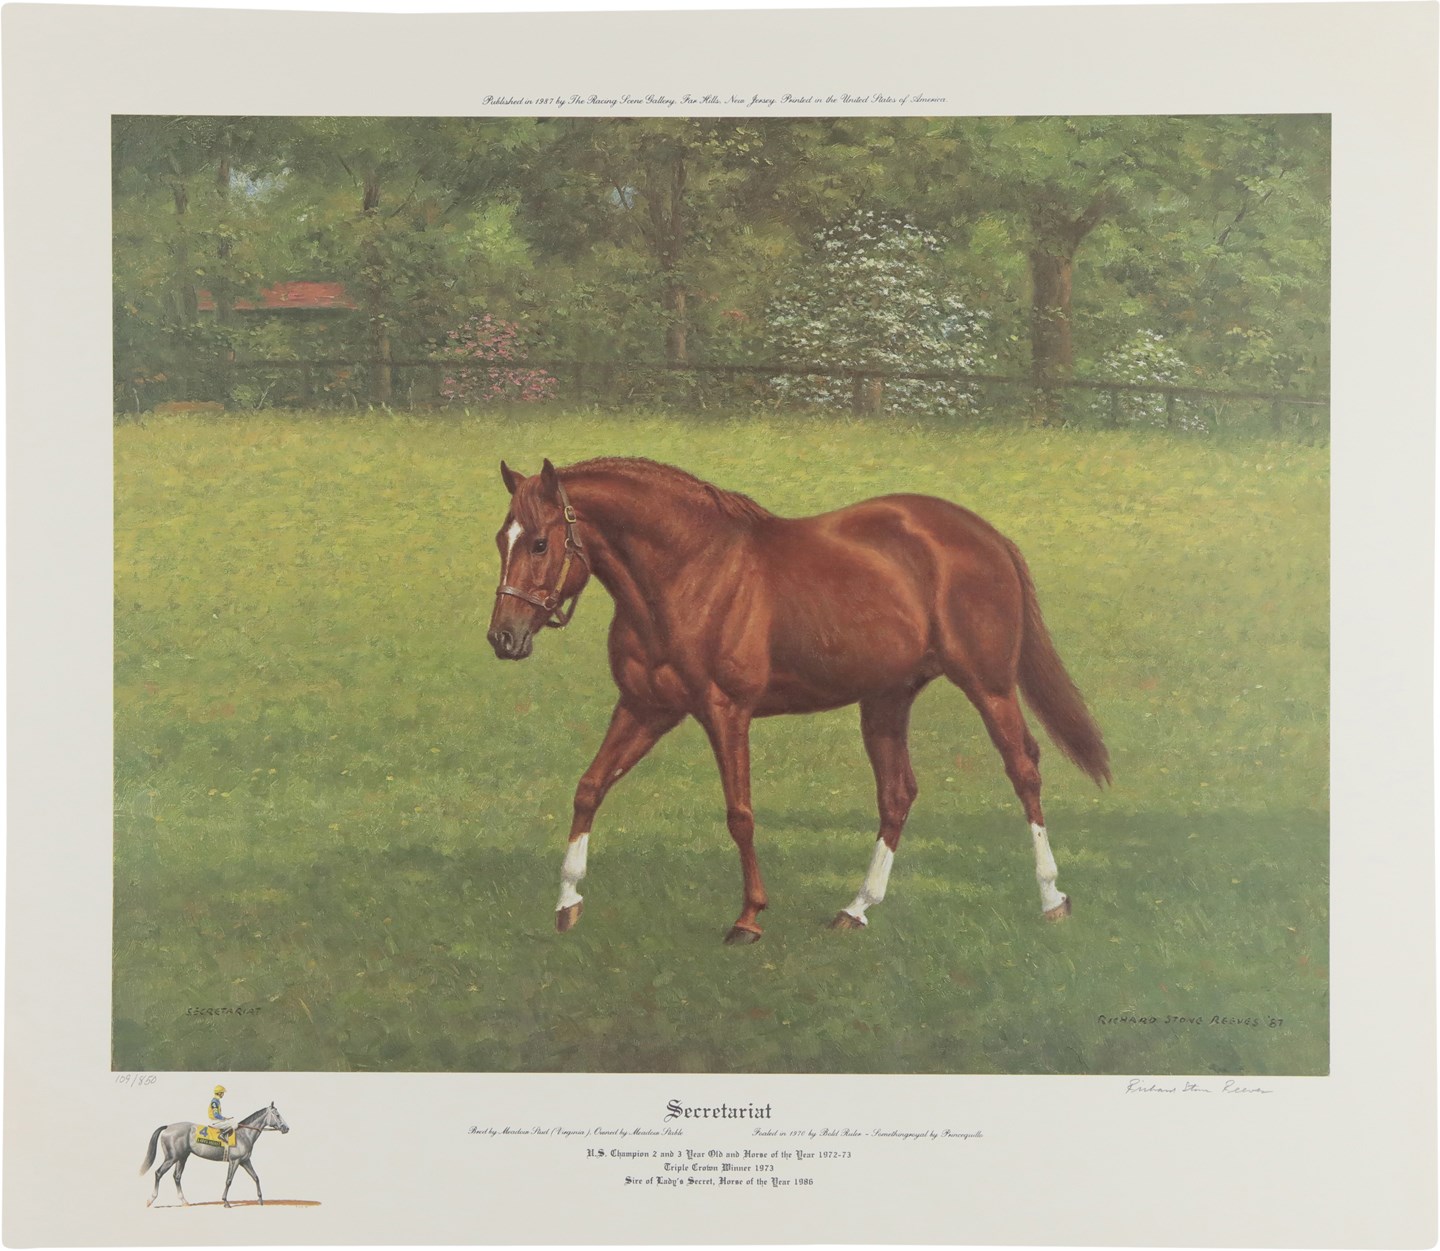 - 1987 Secretariat Limited-Edition Lithograph by Richard Stone Reeves #109/850